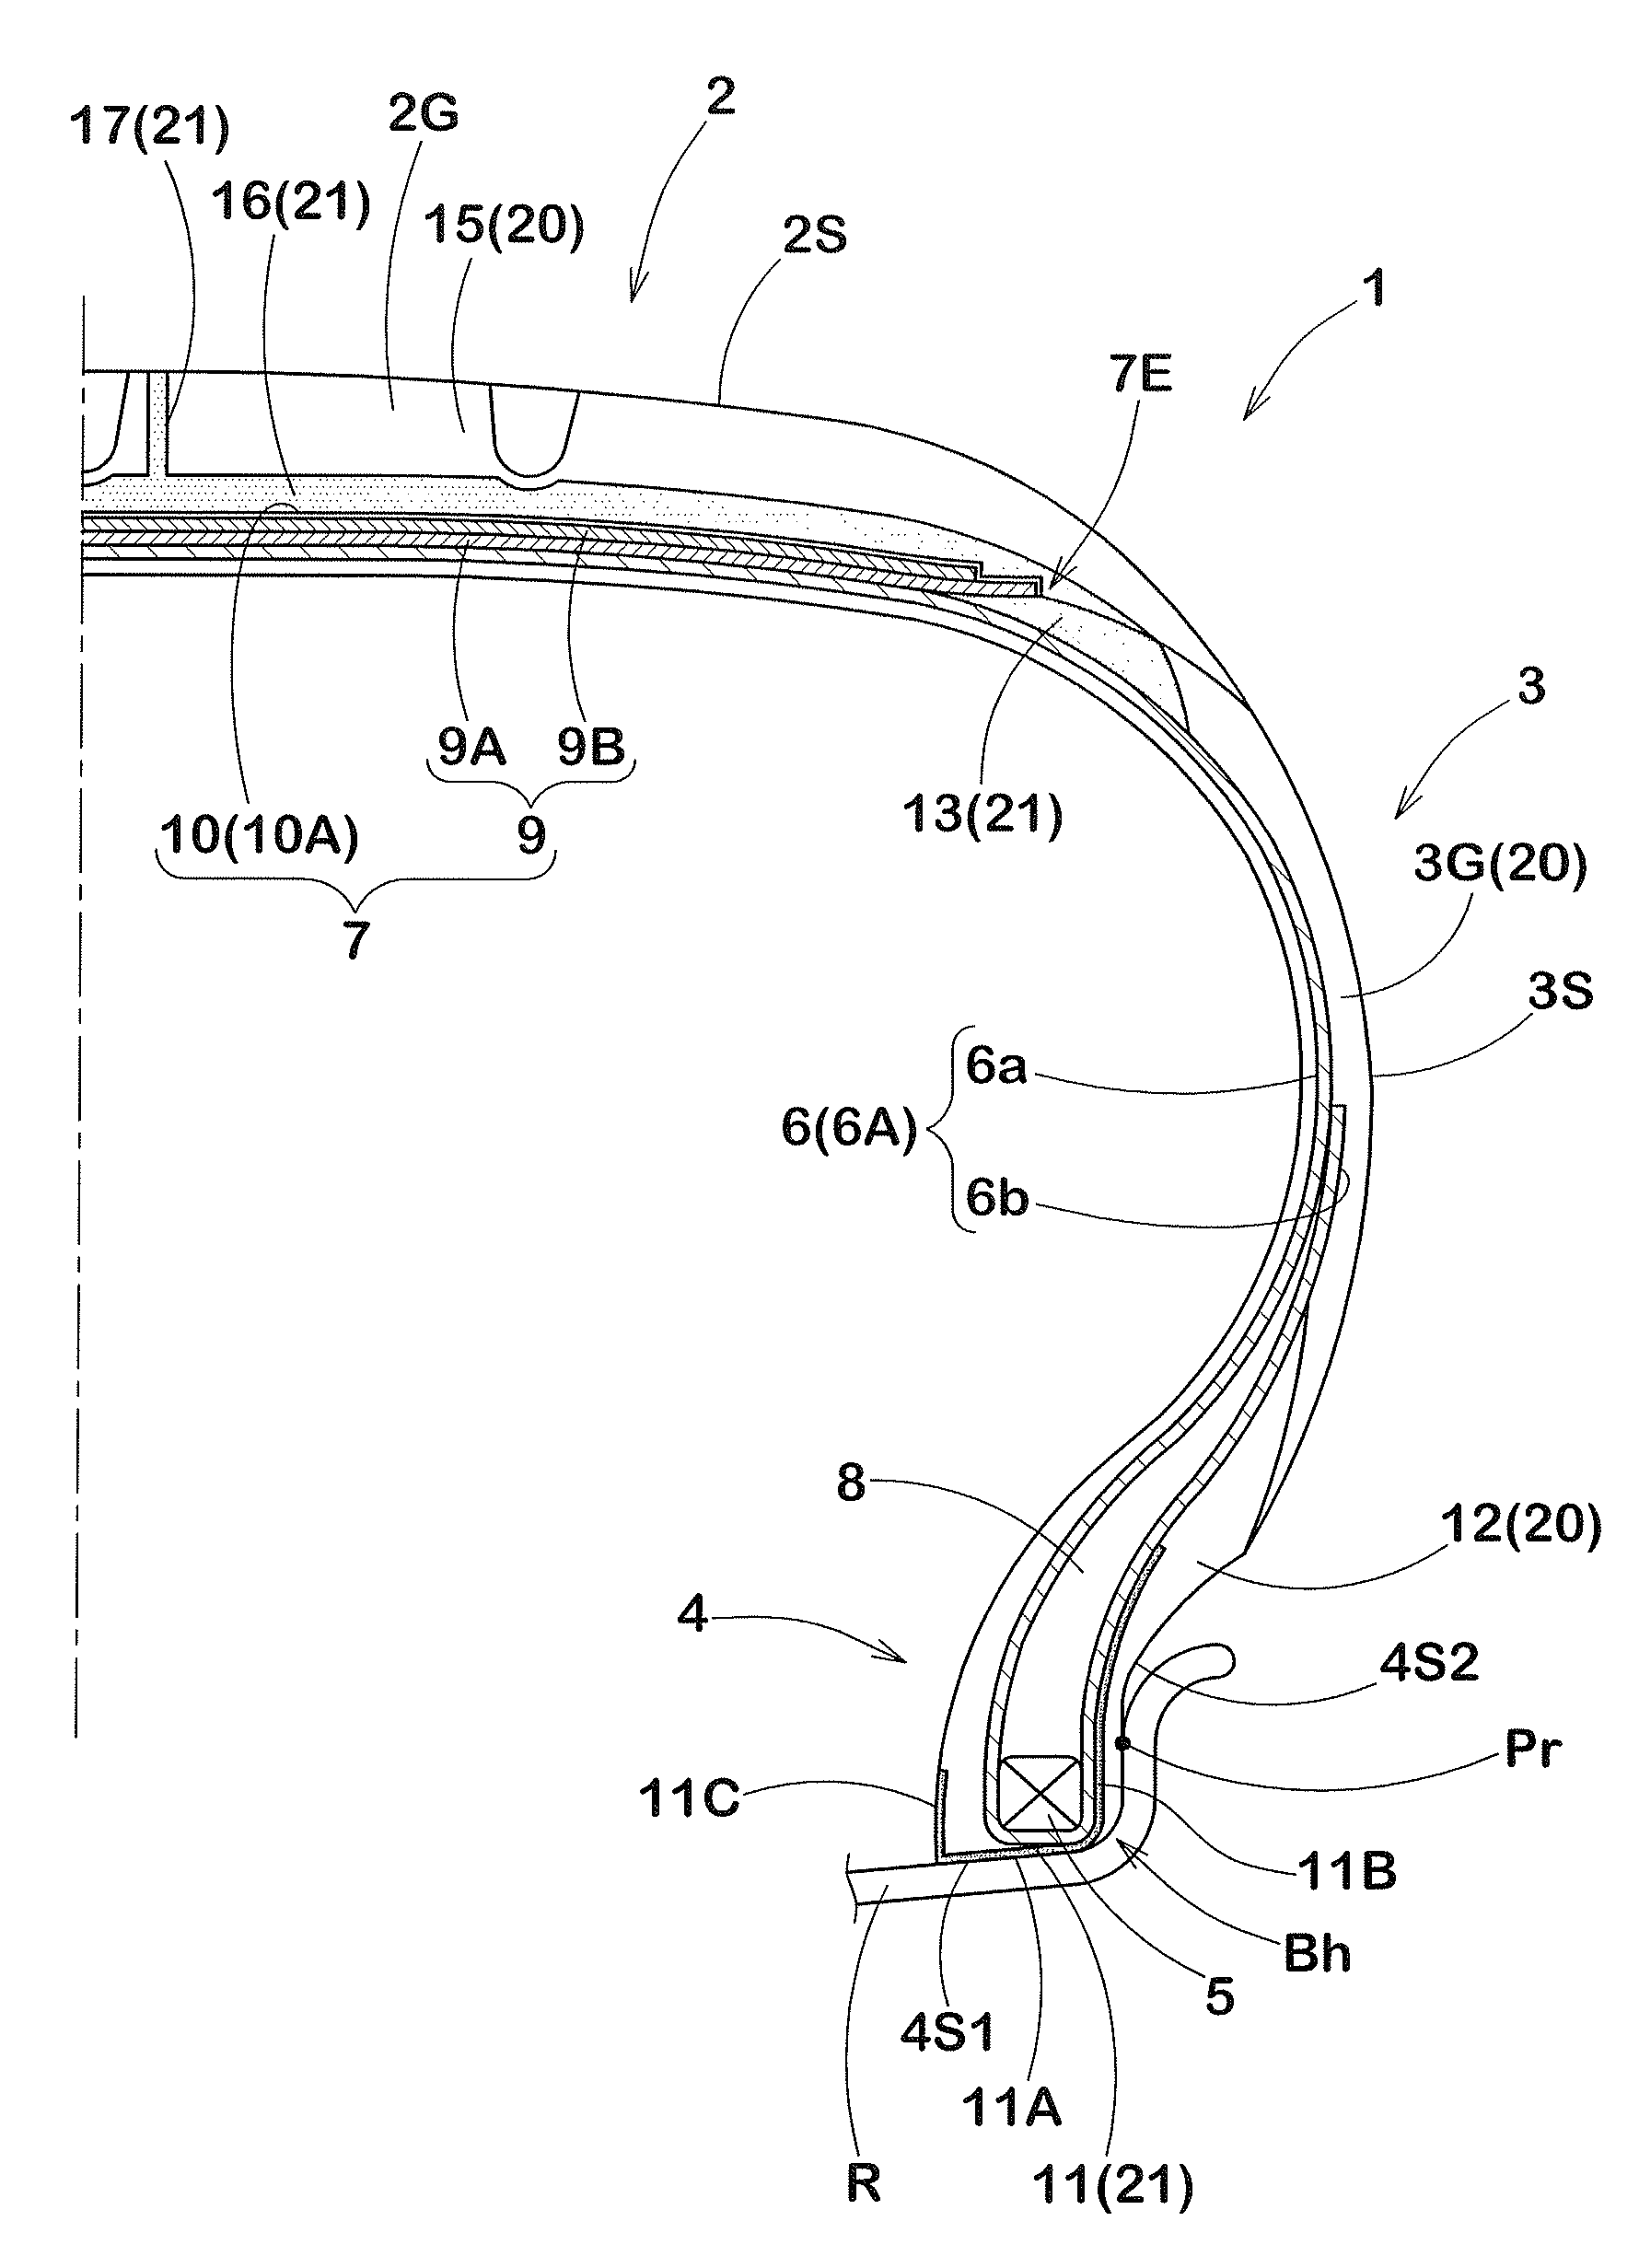 Pneumatic tire with electrically conductive rubber material